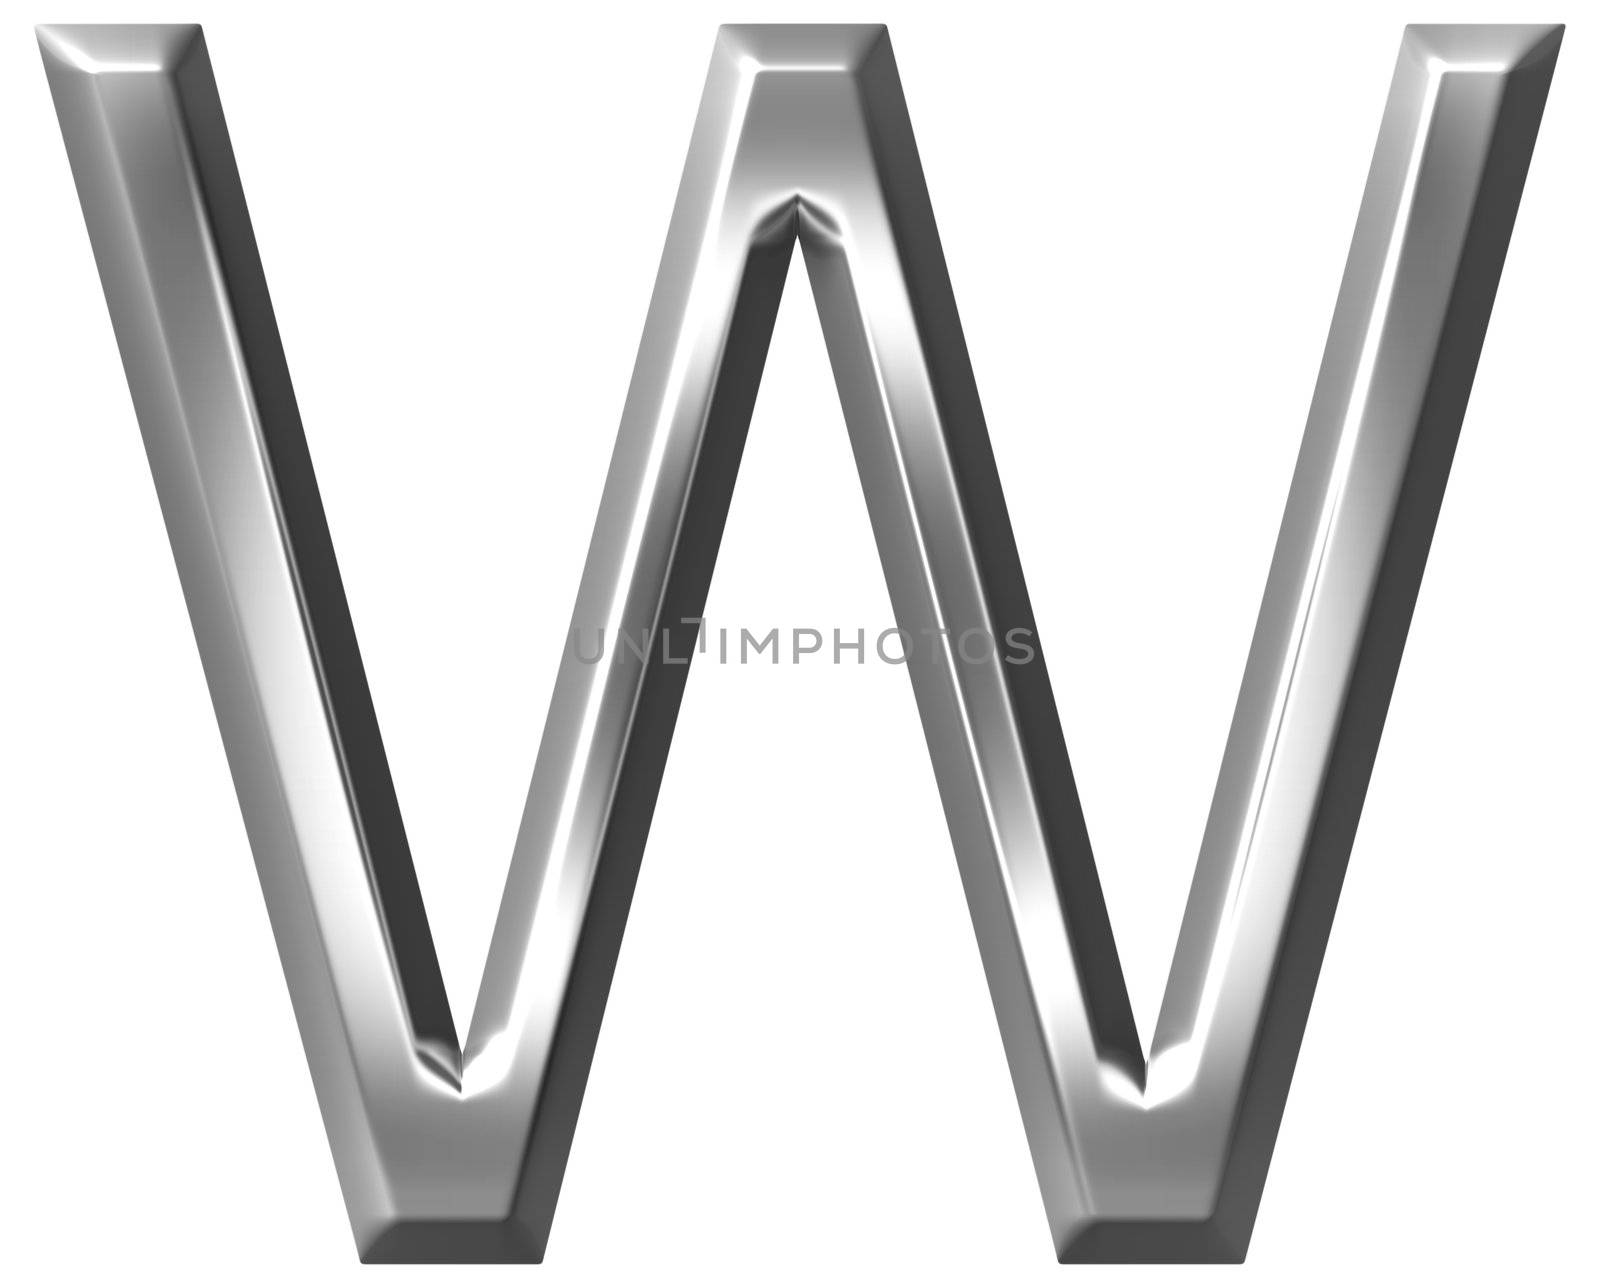 3d silver letter W isolated in white